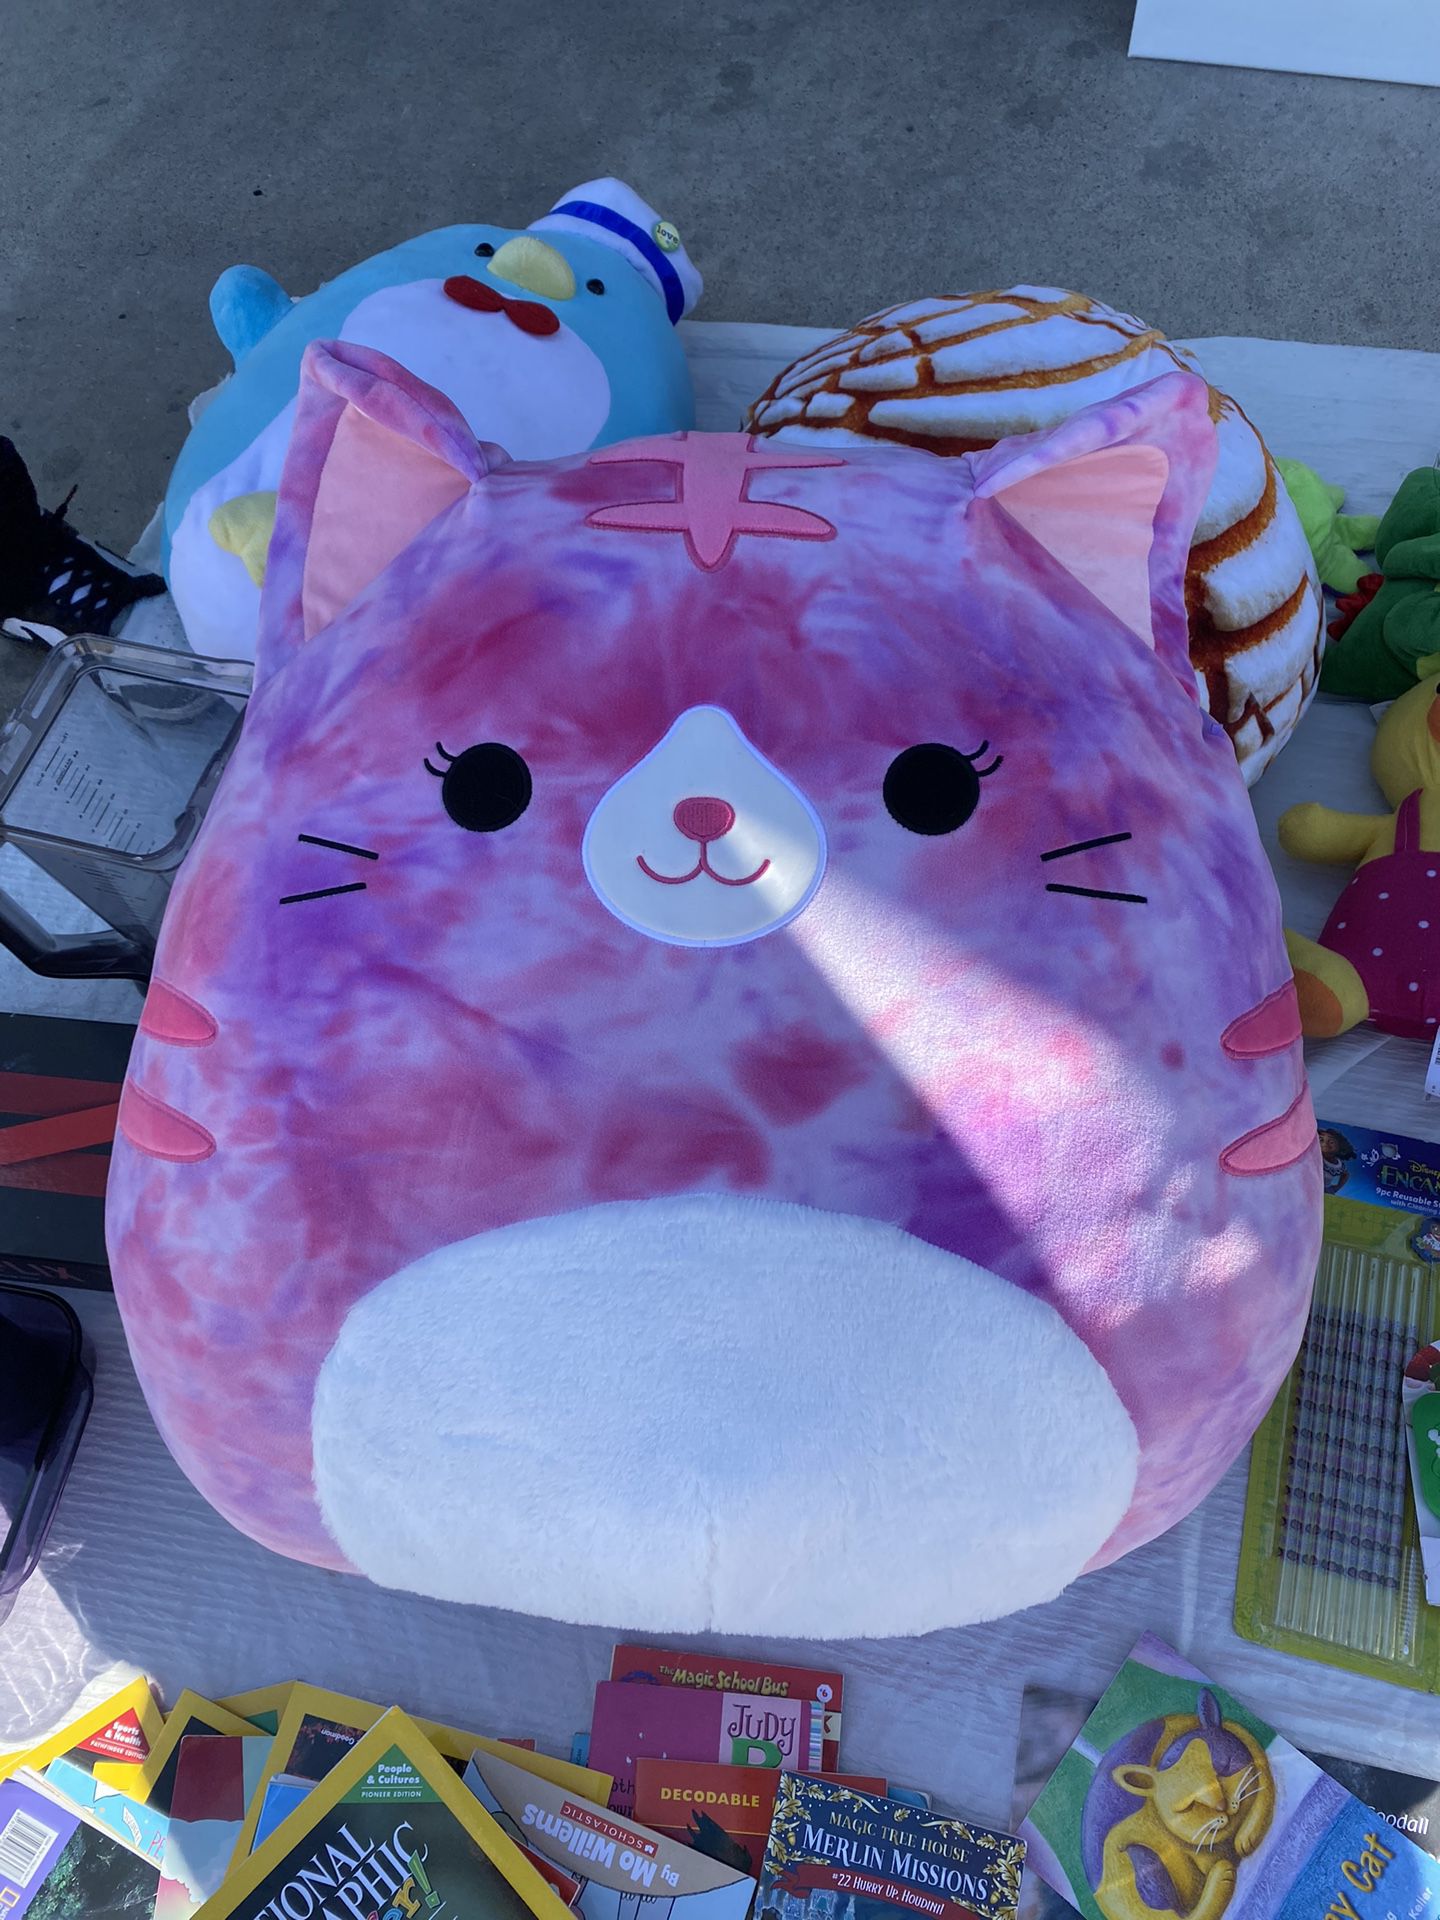 GIANT PINK CAT SQUISHMALLOW